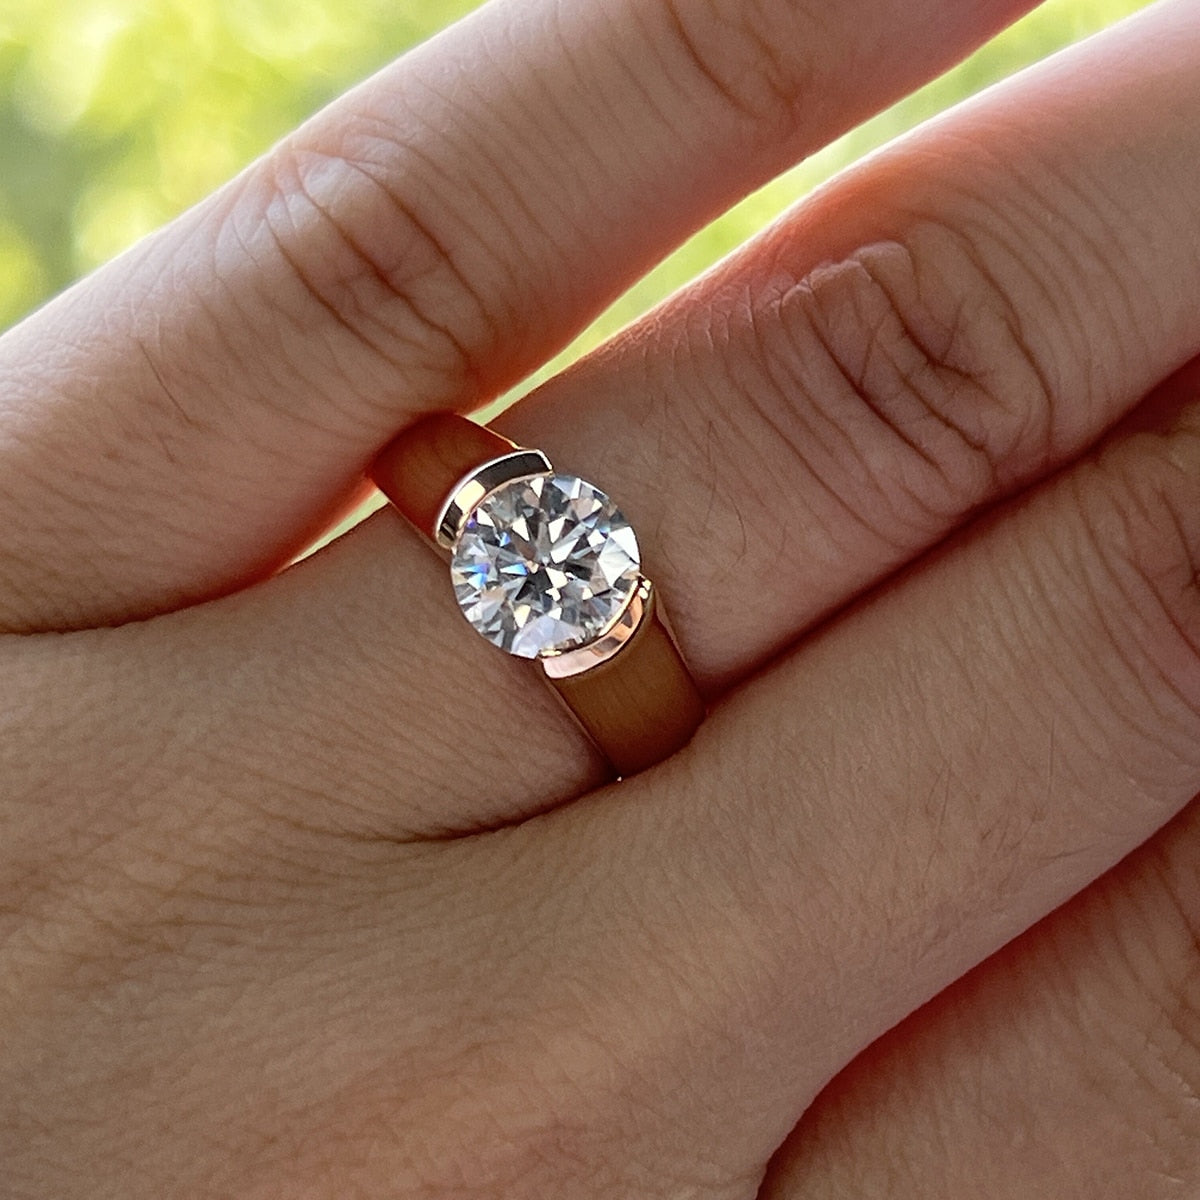 A rose gold plated round cut moissanite tension set in a floating half bezel setting on a ring finger.